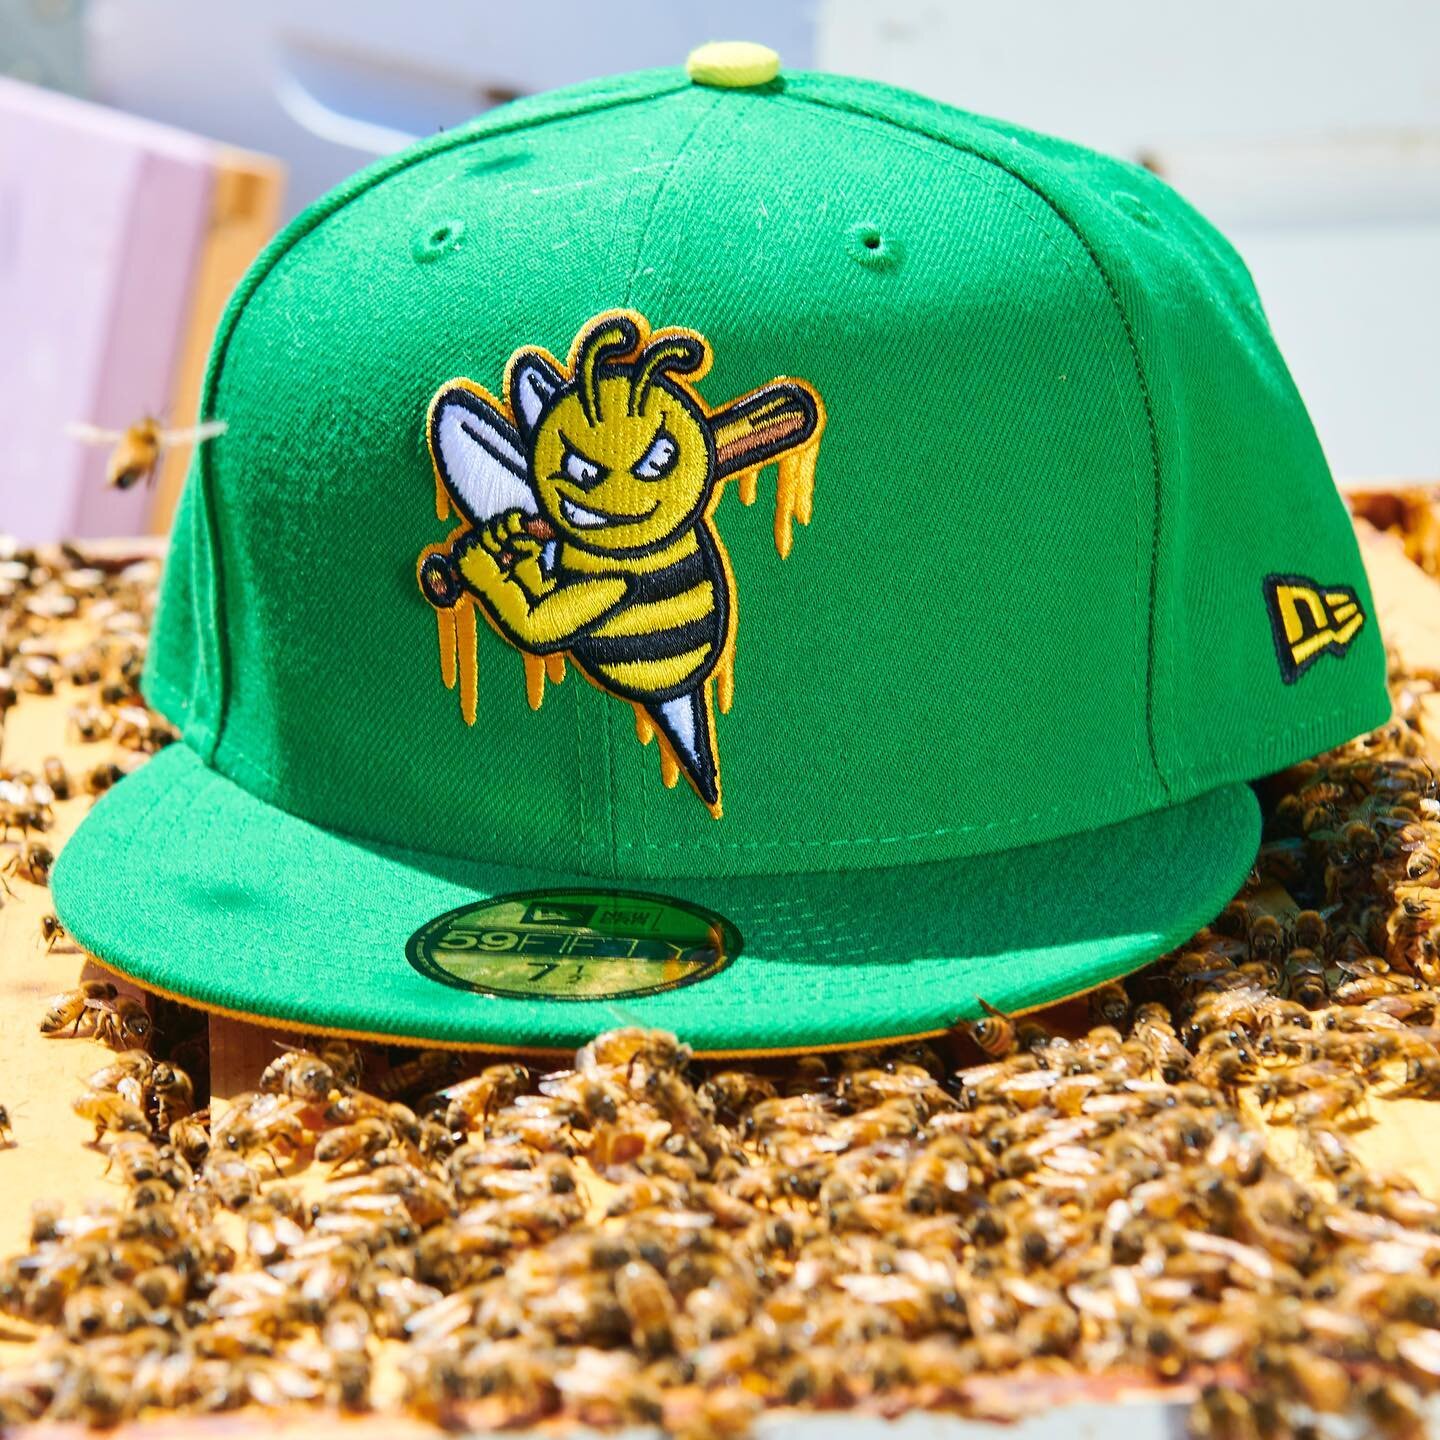 Swarm Sting 🚨 ⏭ Don&rsquo;t forget that the Honey Bee #🍯🐝 @dionicbrand cap drops TODAY in &lt; 3 hours over @hatclub .com precisely @ 1:59pm EST. Don&rsquo;t sleep these will sell out QUICK. Only had to pay for these shots with 1 sting attack ;) I